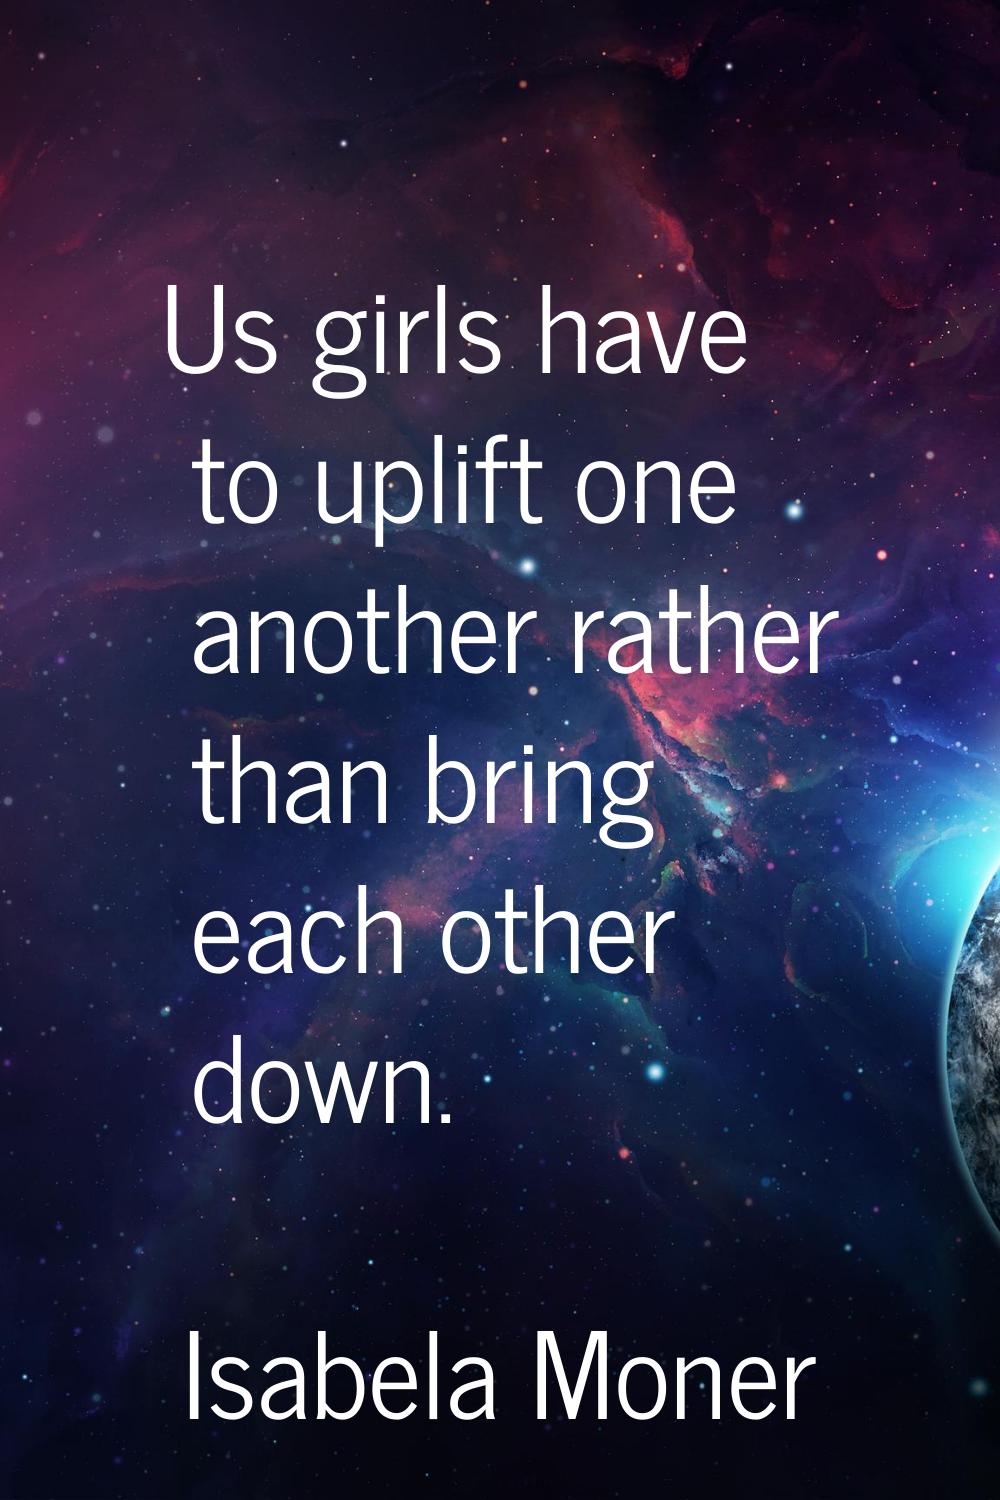 Us girls have to uplift one another rather than bring each other down.